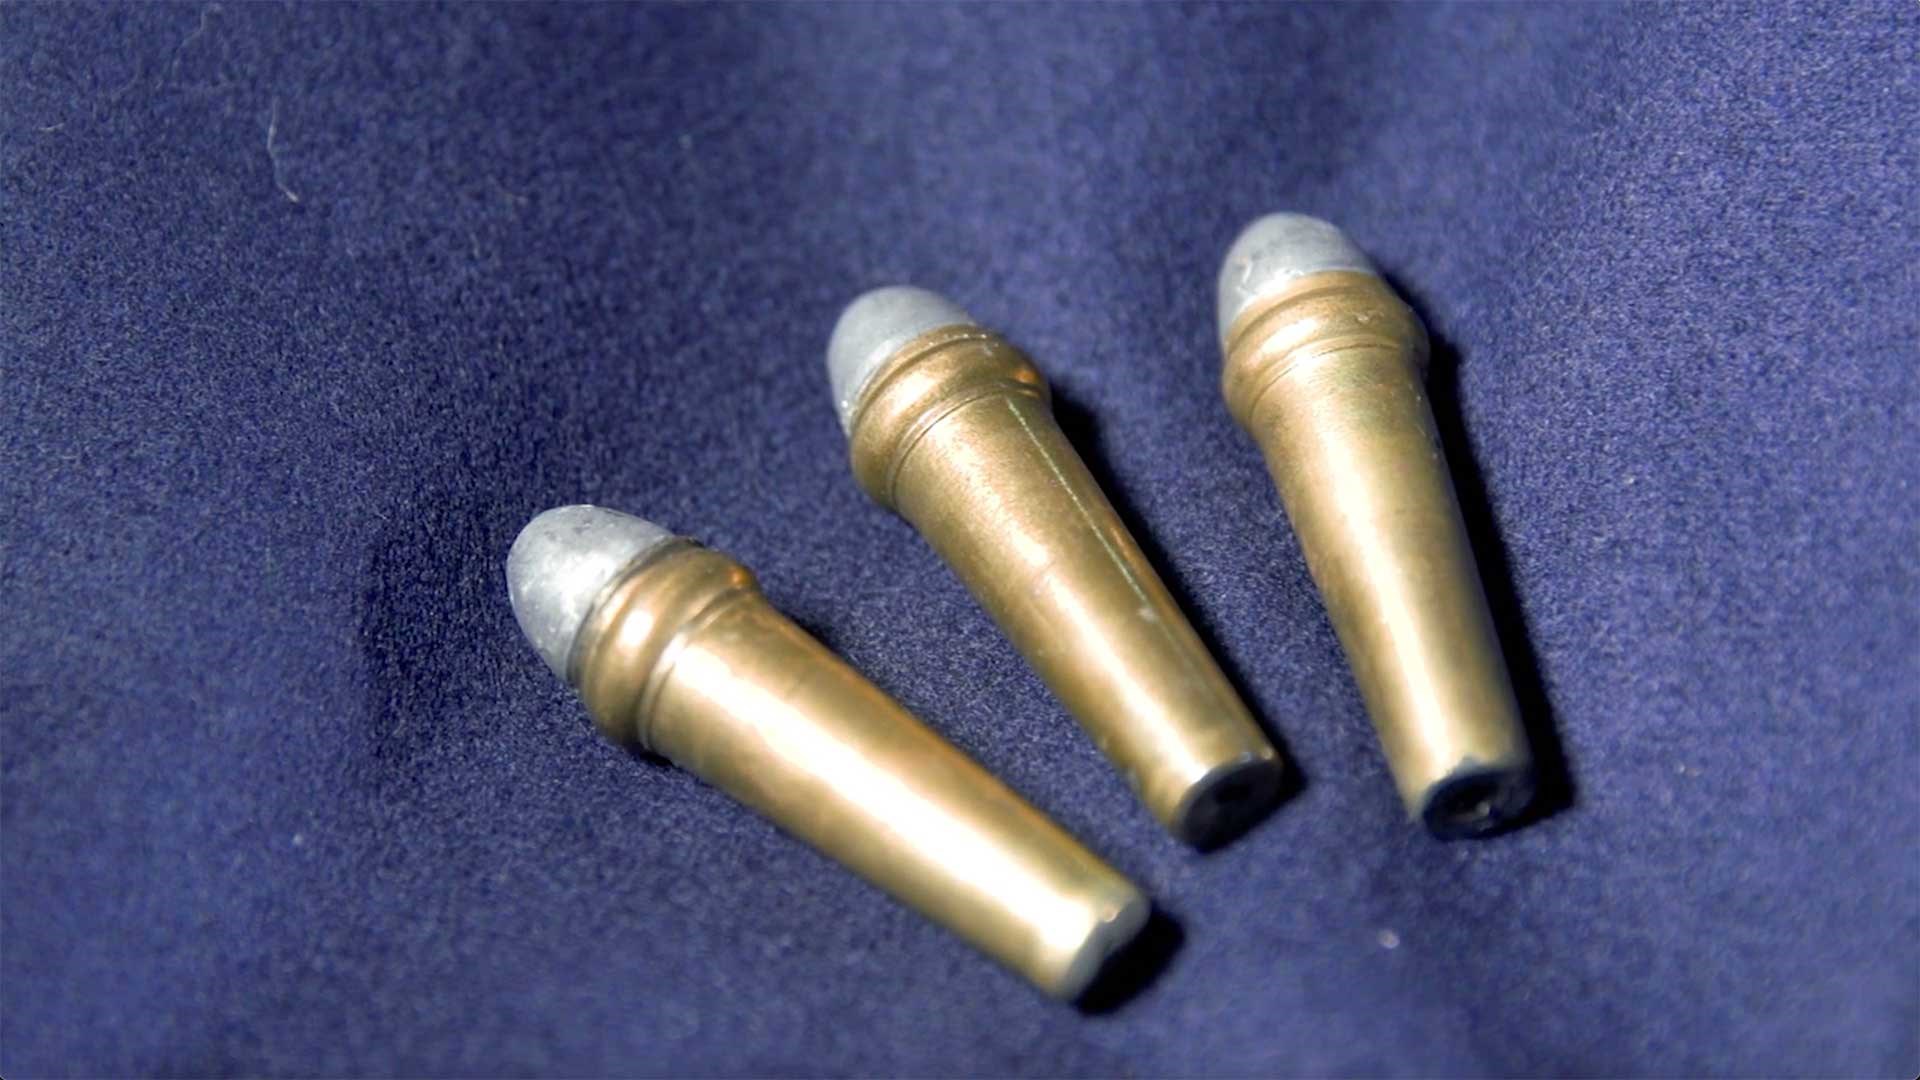 Three Burnside carbine cartridges laid out on a blue cloth background.